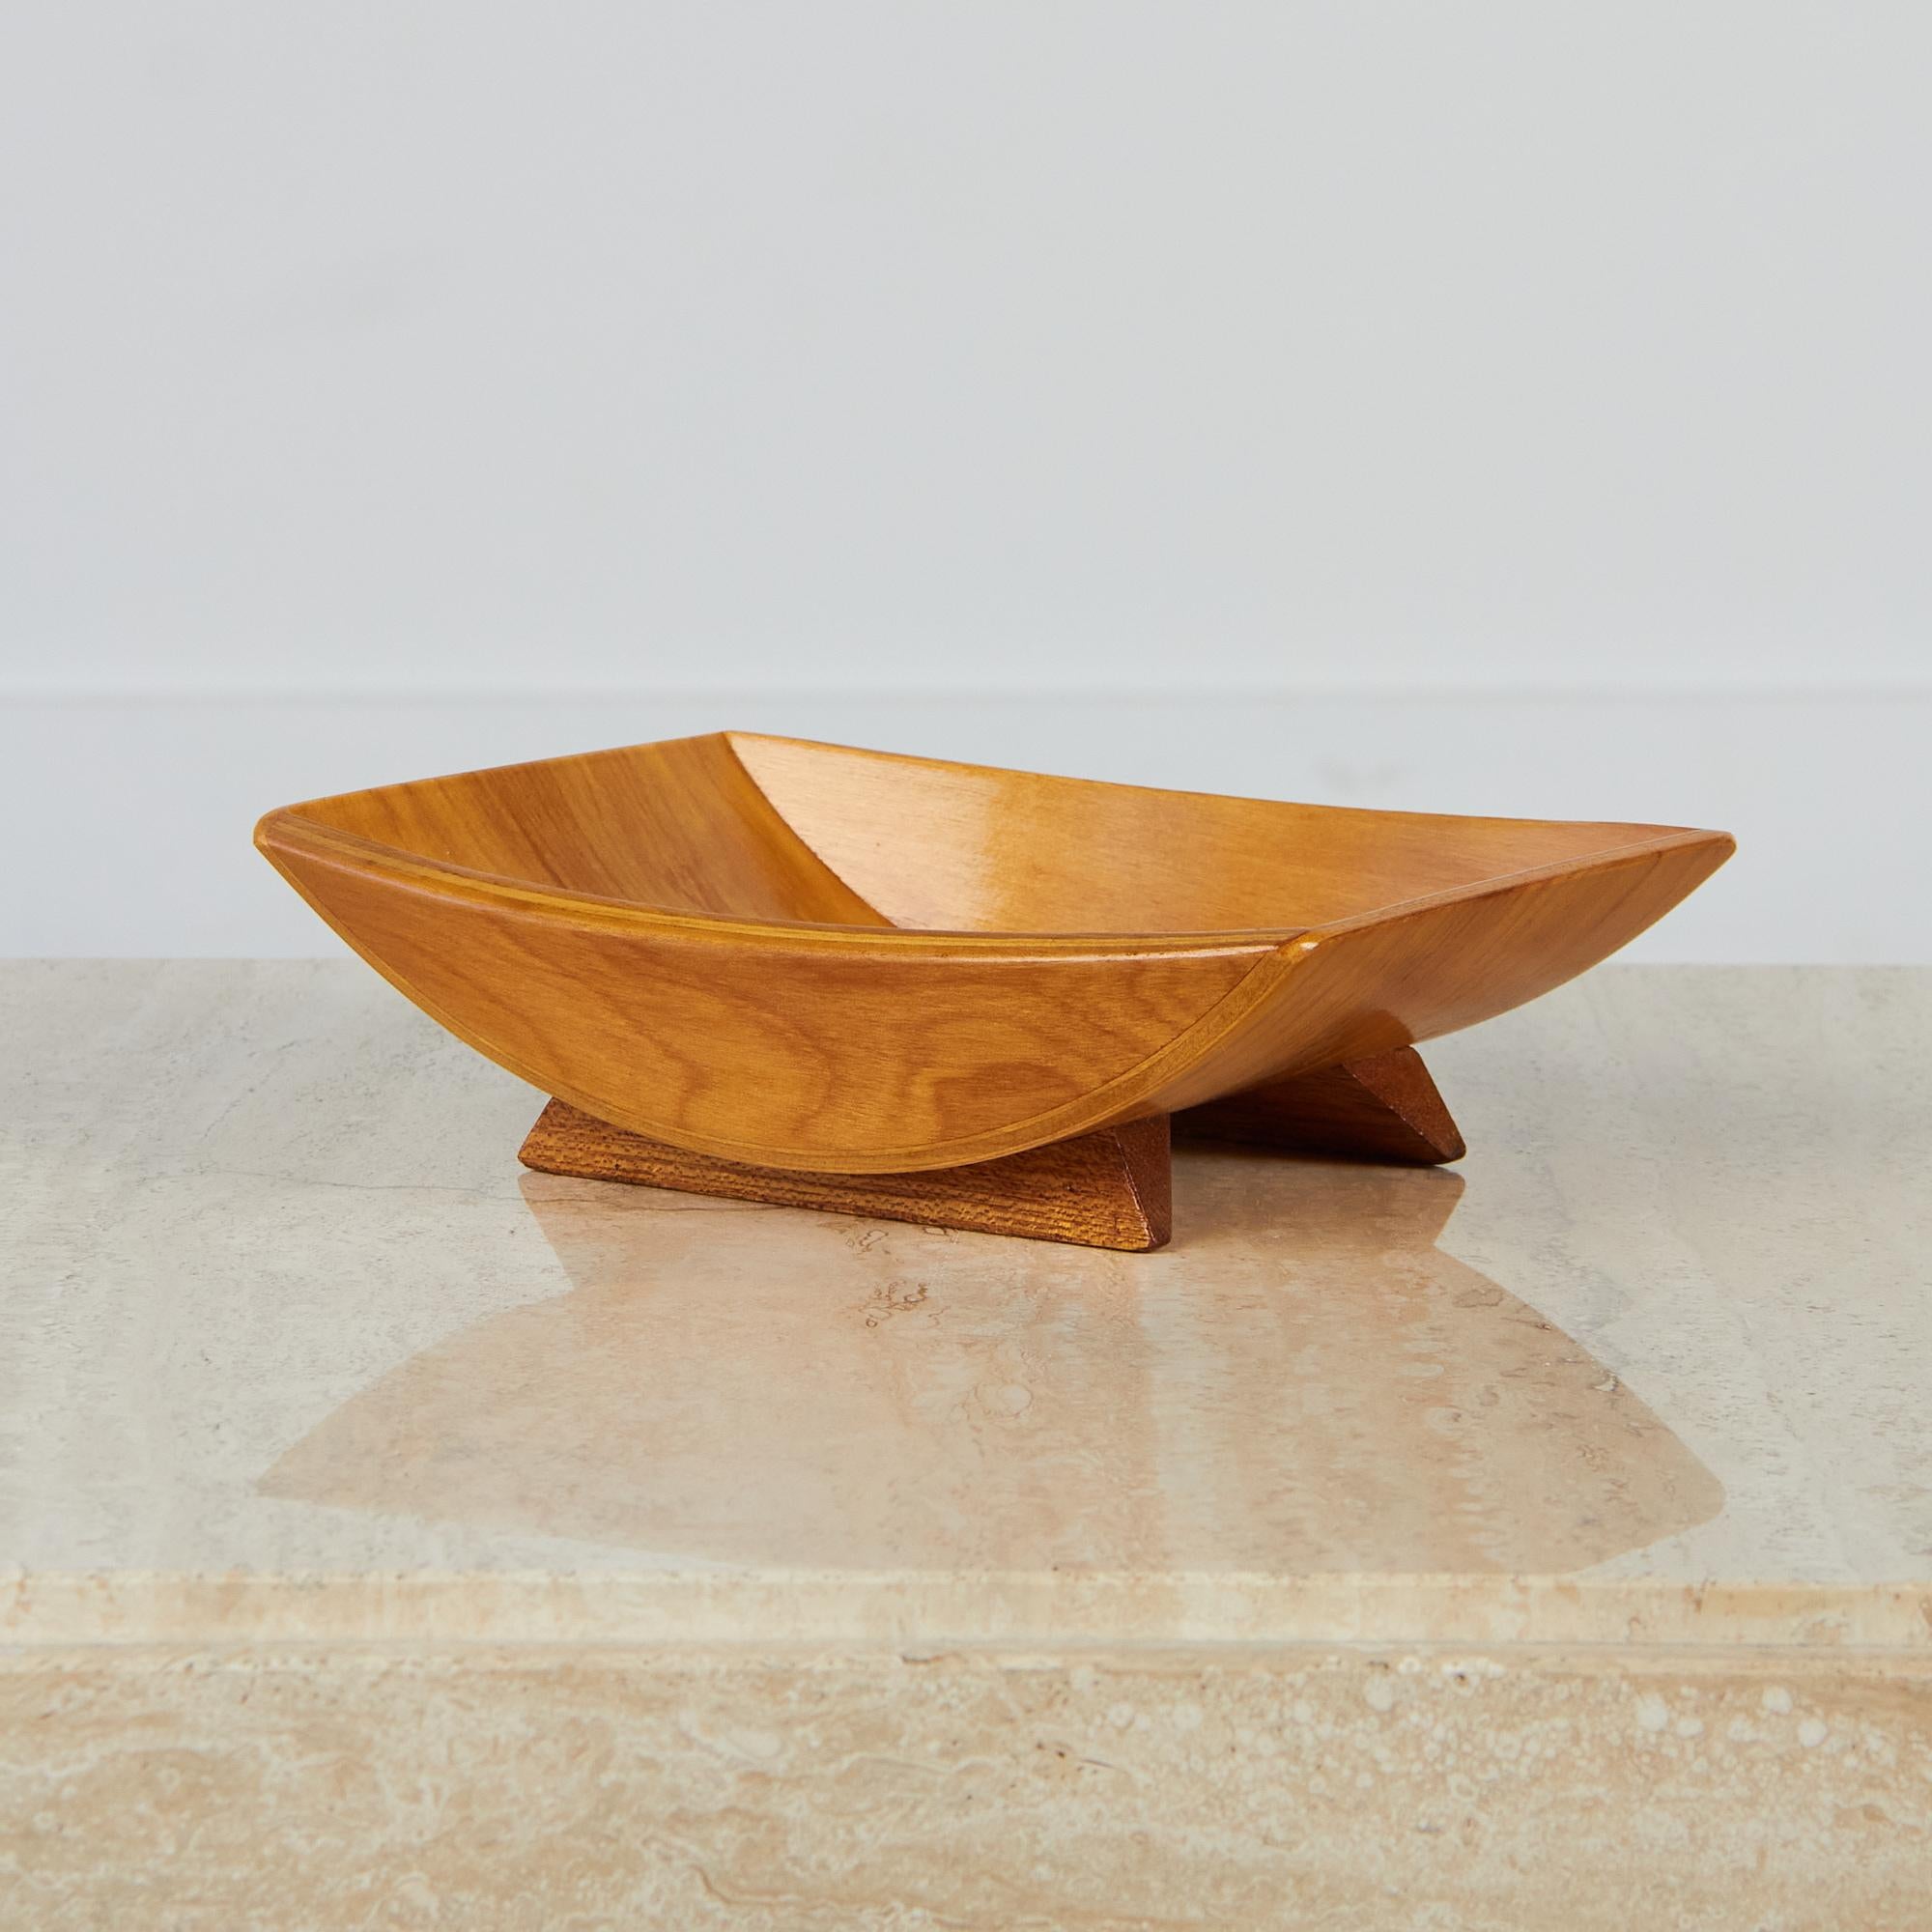 A walnut footed bowl by Gladmark, c.1960s made in Burbank, California. Each tray would be special on its own, or make a statement together for your next gathering featuring an abundance of nuts, cheeses and other snacks. Each bowl has been oiled to